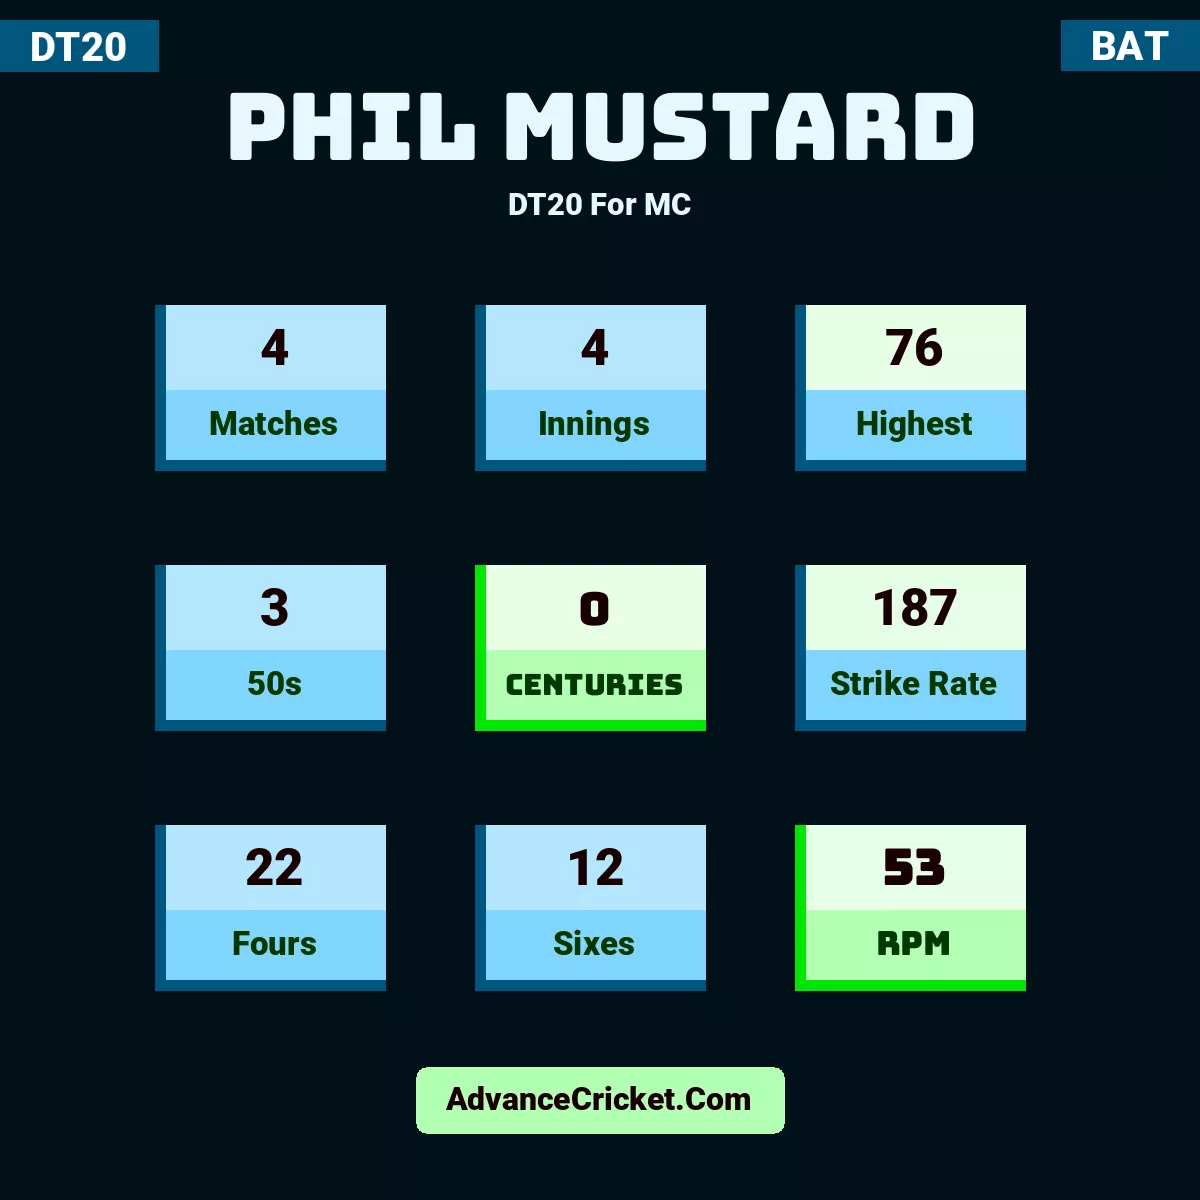 Phil Mustard DT20  For MC, Phil Mustard played 4 matches, scored 76 runs as highest, 3 half-centuries, and 0 centuries, with a strike rate of 187. P.Mustard hit 22 fours and 12 sixes, with an RPM of 53.